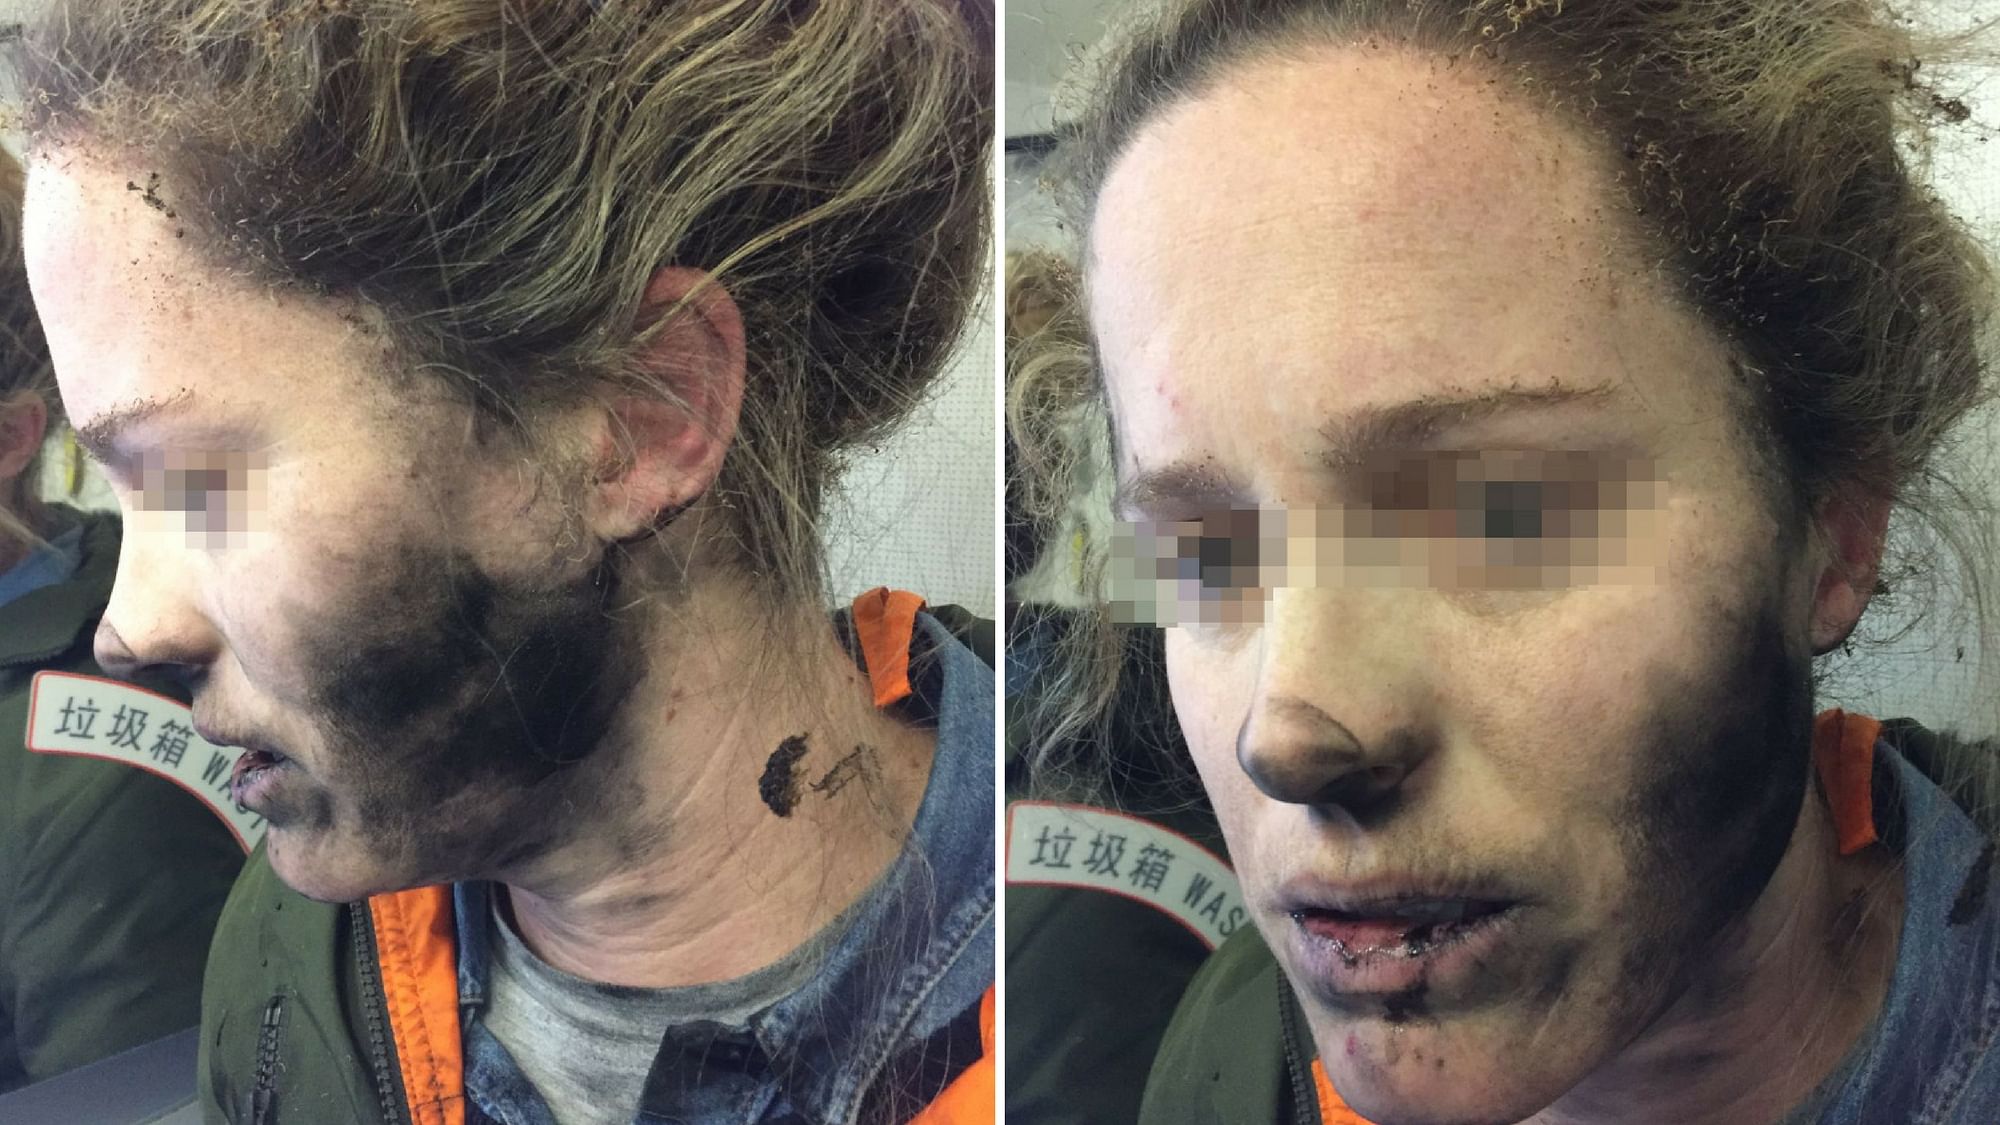 A woman ended up with serious burn injuries on her face while she was listening to music using her battery-operated earphones. (Photo Courtesy: <a href="https://www.atsb.gov.au/newsroom/news-items/2017/battery-explosion-mid-flight/">Australian Transport Safety Bureau</a>/Altered by <b>The Quint</b>)